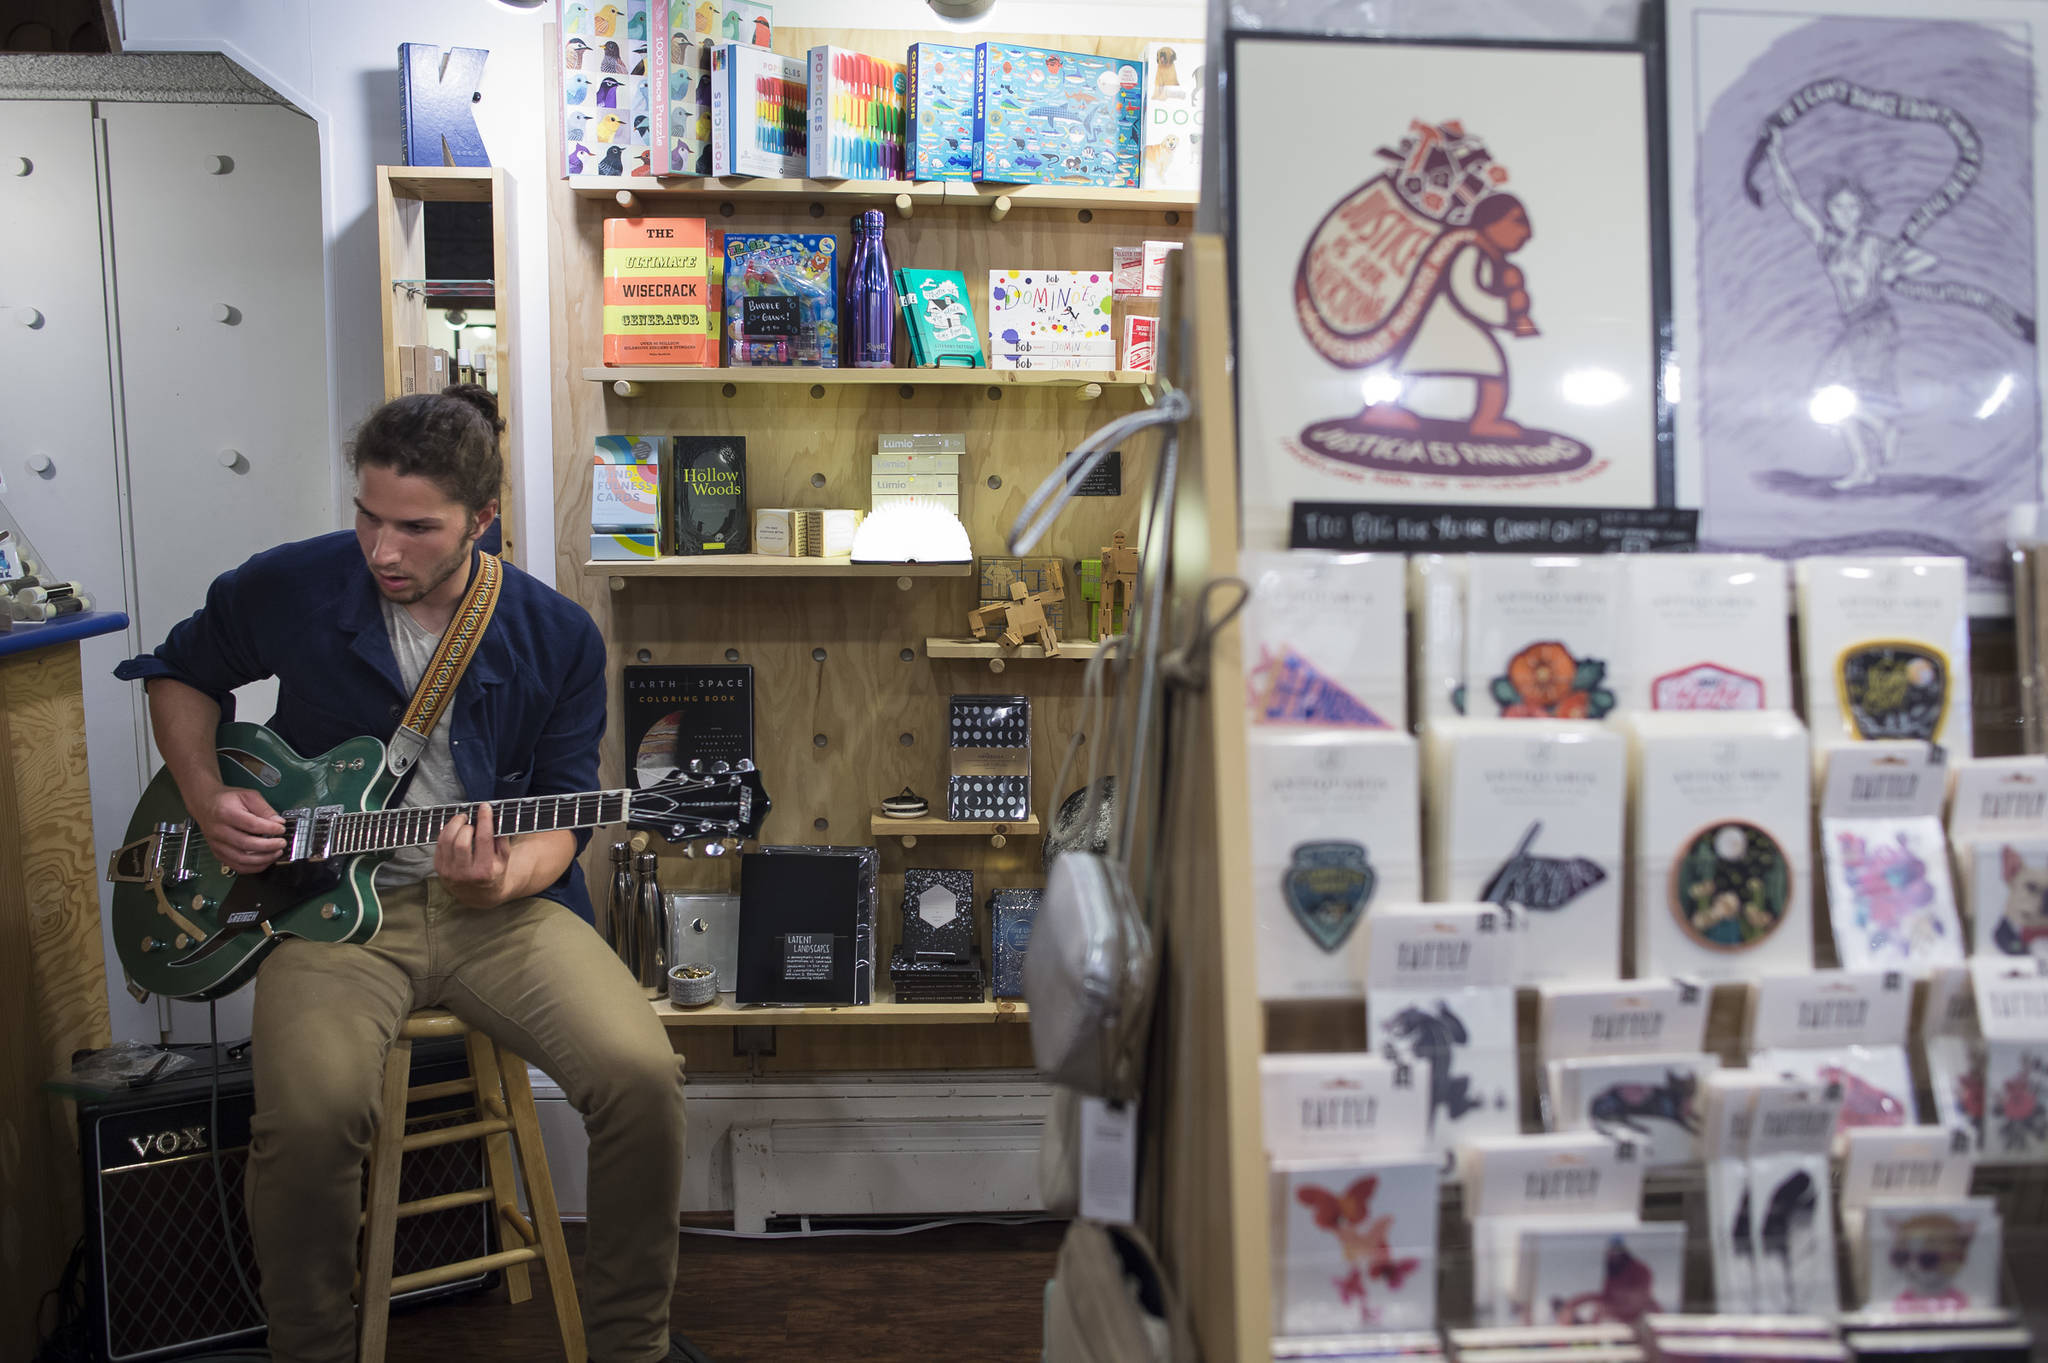 Avery Stewart provides live music at Kindred Post during First Friday on Friday, Sept. 7, 2018. (Michael Penn | Juneau Empire)